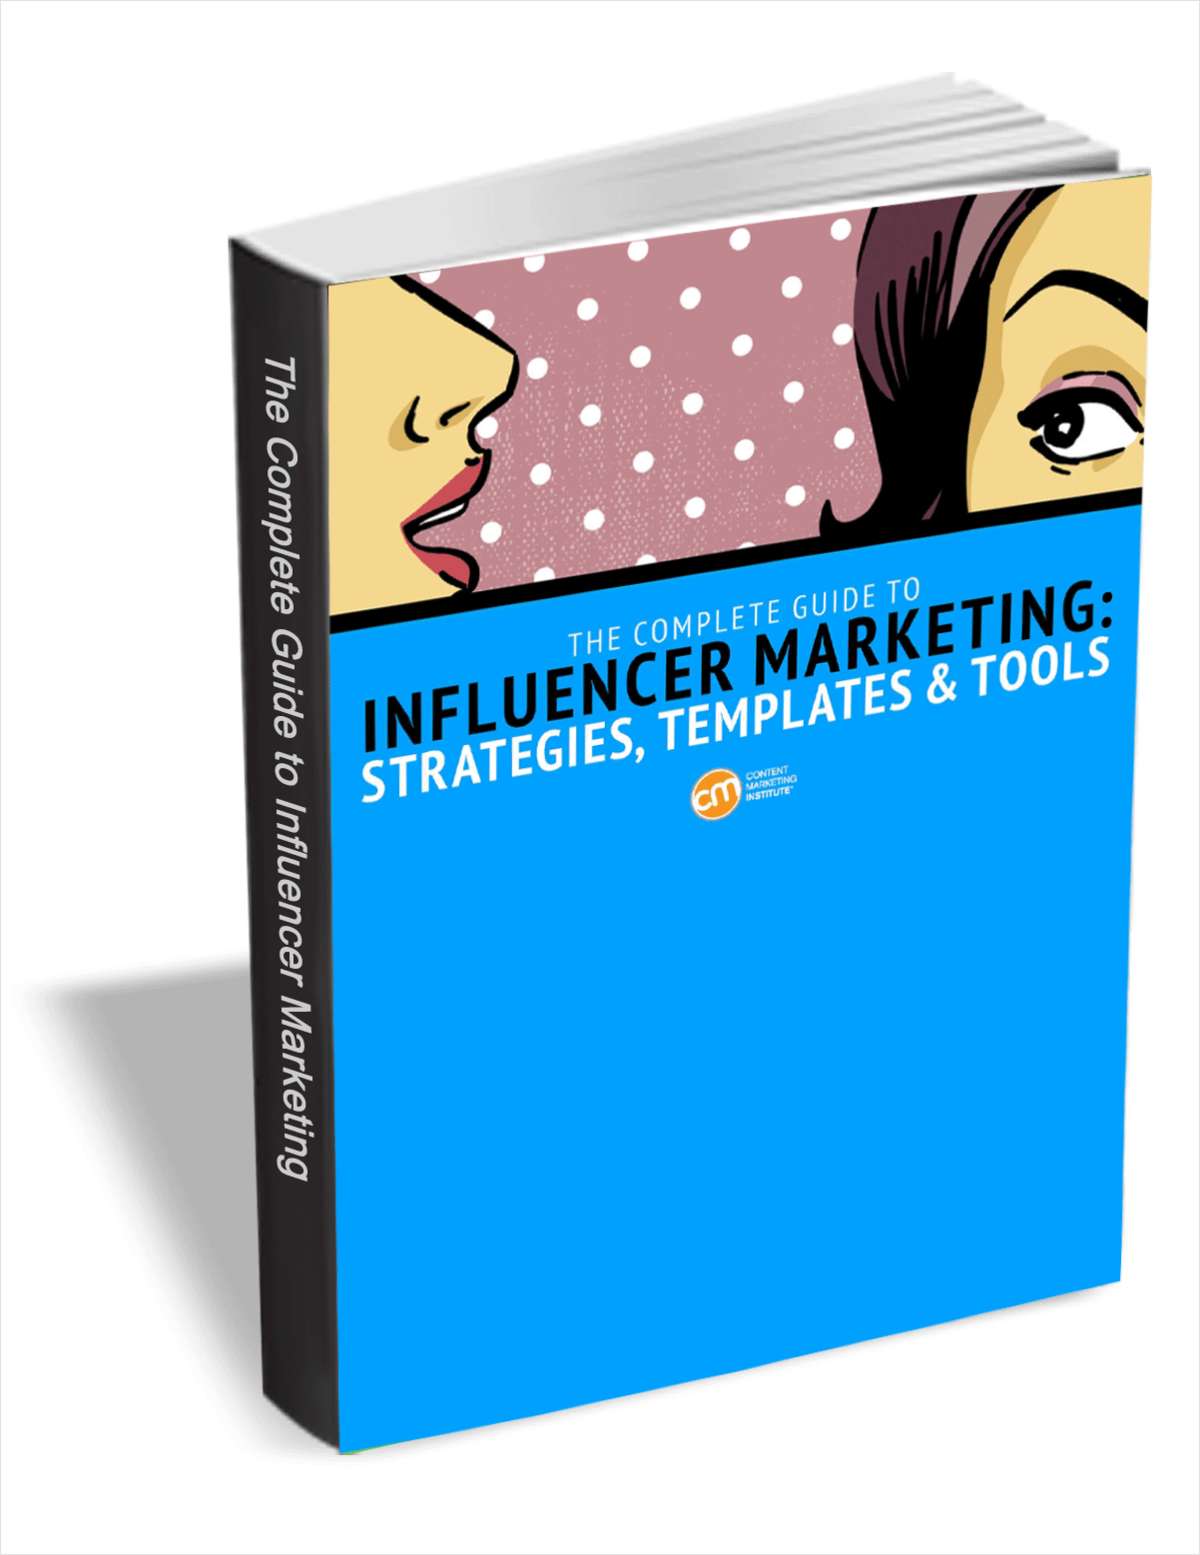 The Complete Guide to Influencer Marketing: Strategies, Templates & Tools